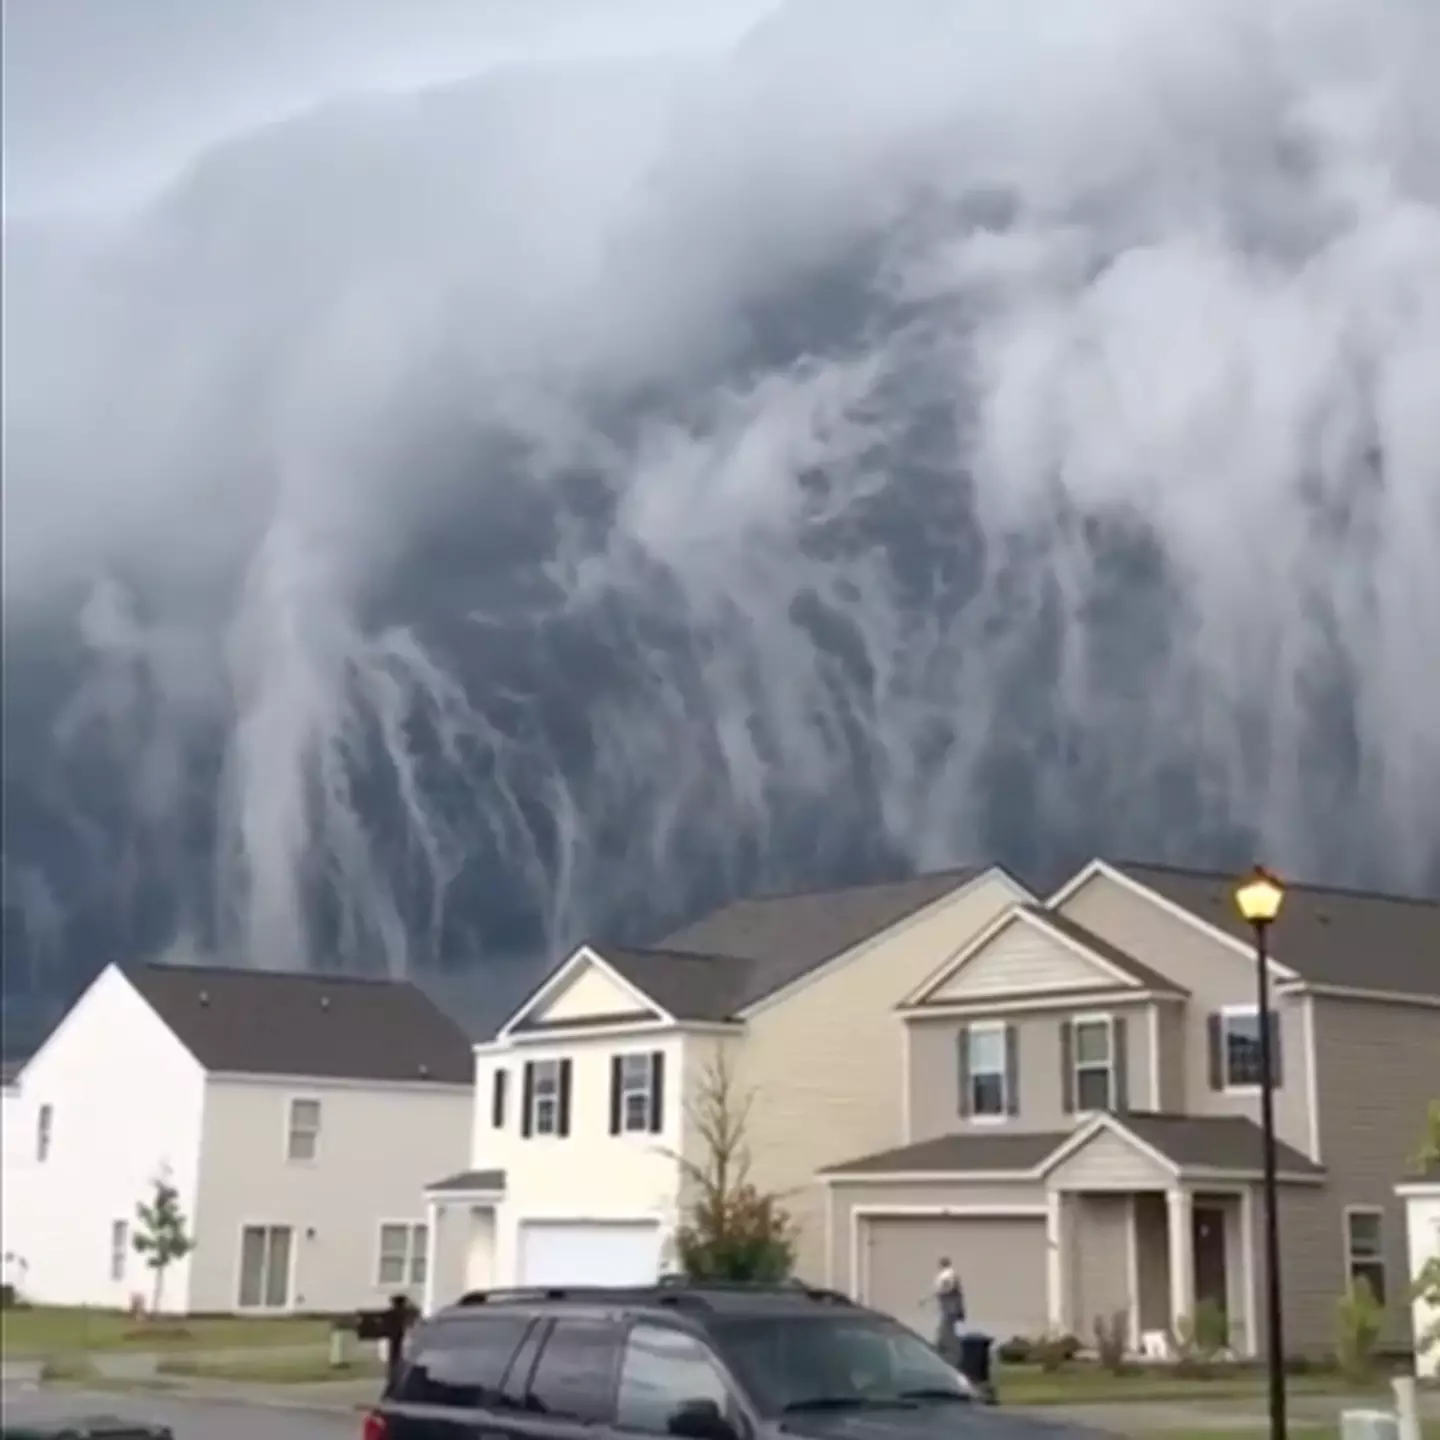 Mesmerizing footage shows clouds that look like an incoming tsunami